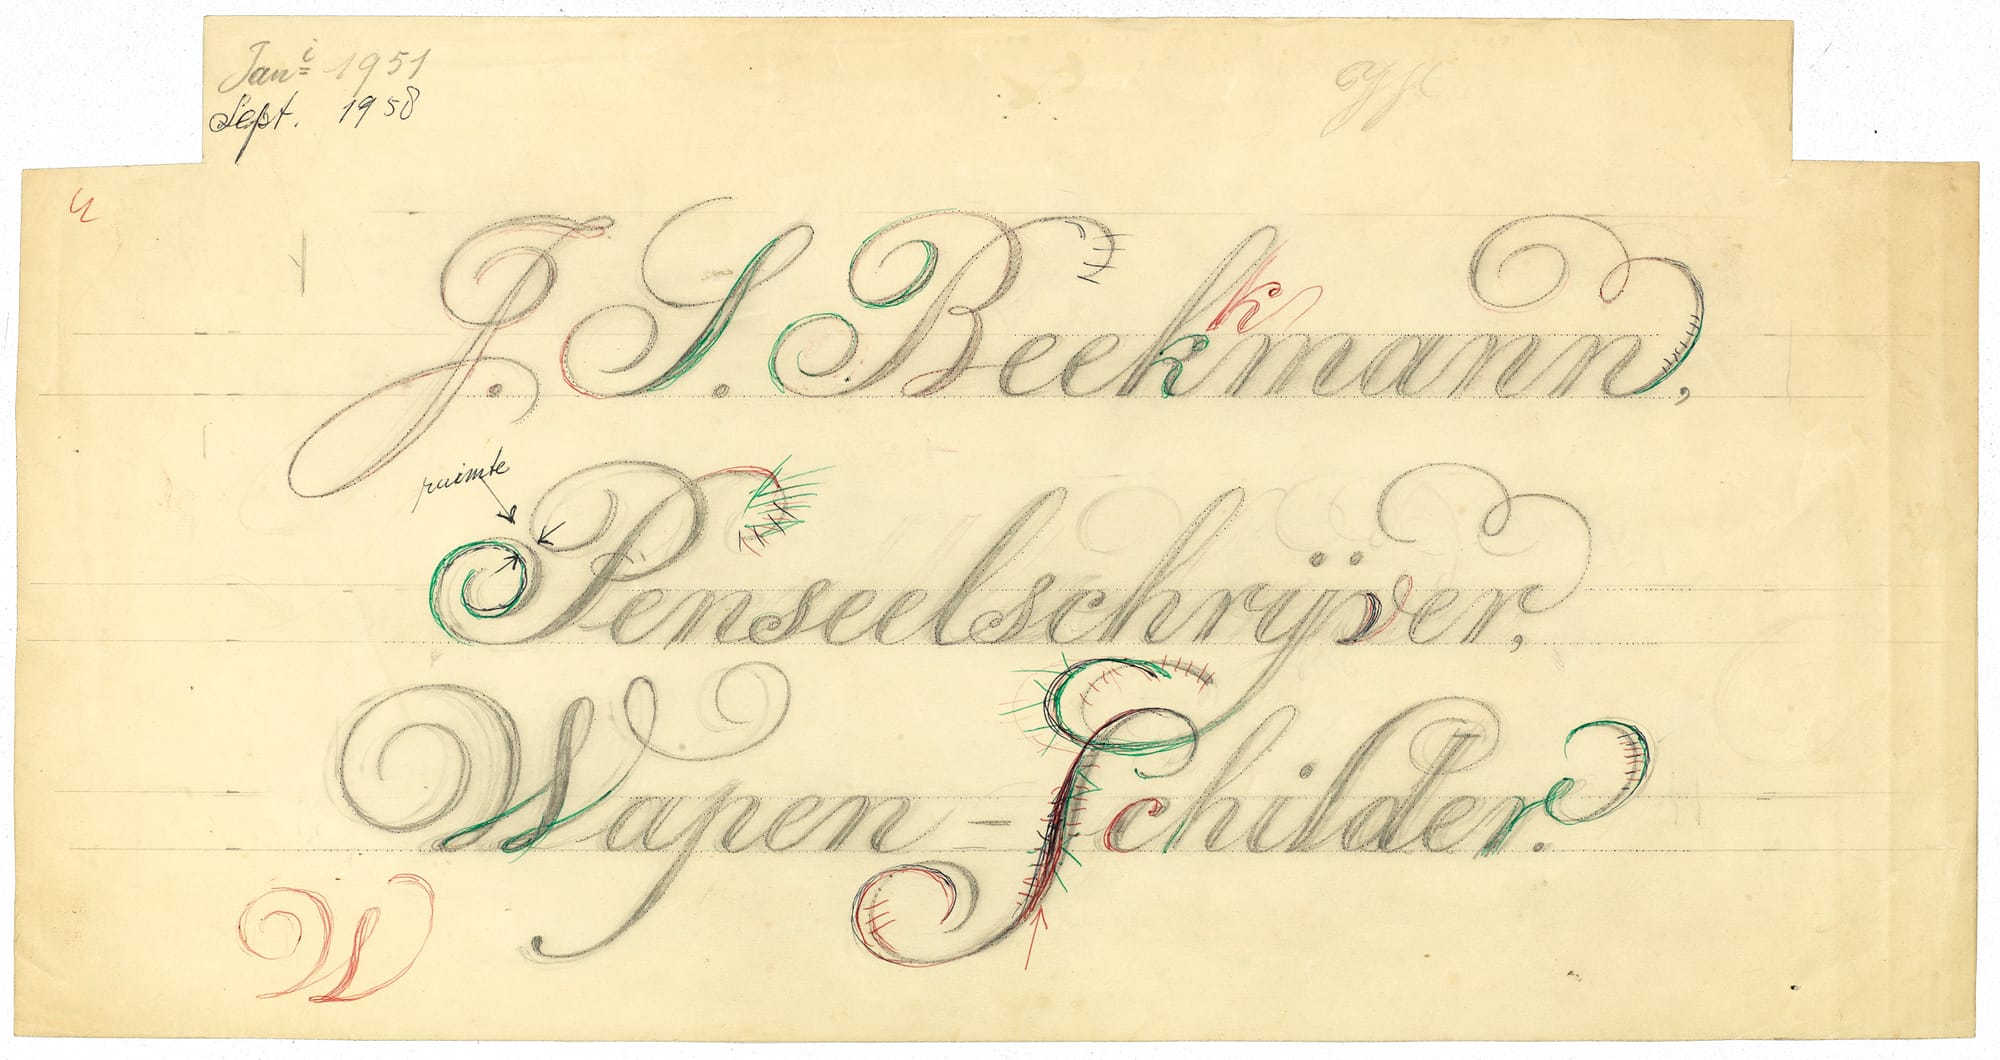 Hand-lettered paper with the name and address of the sign painter that produced it.